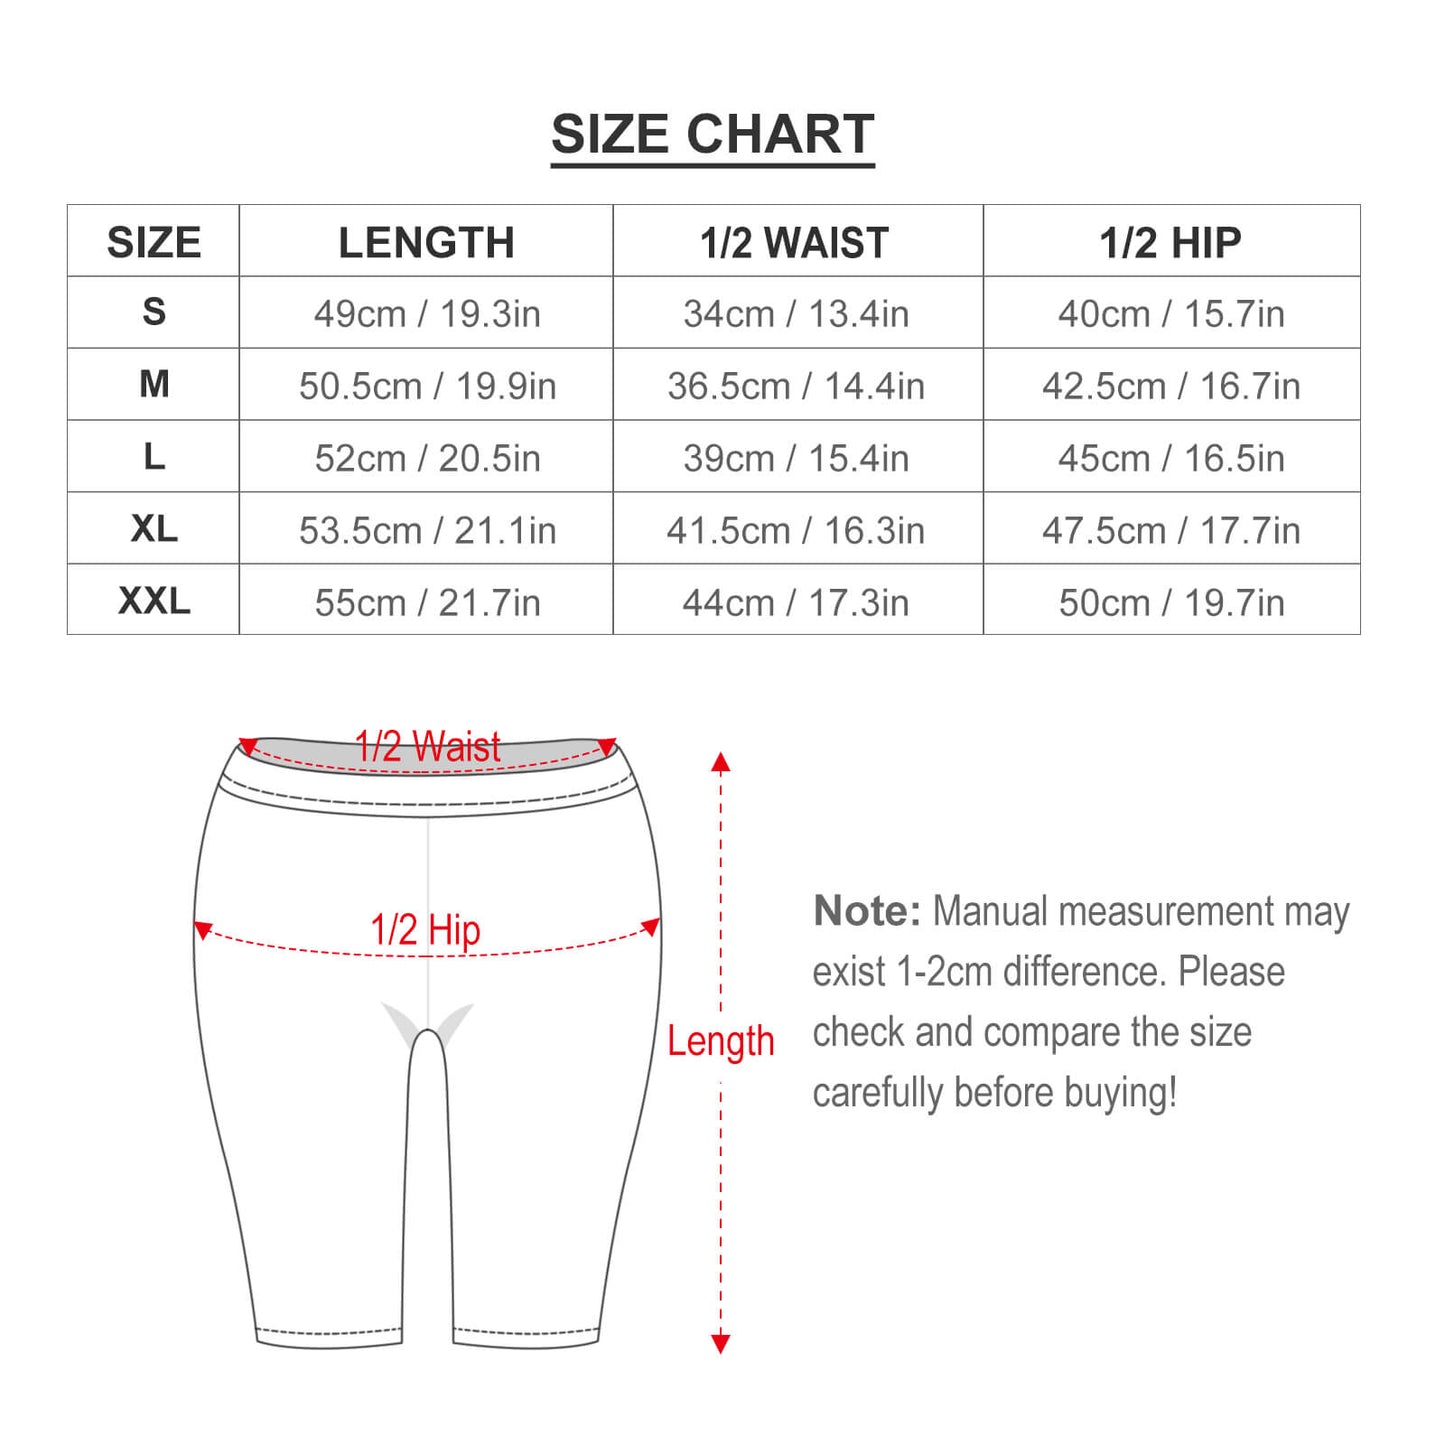 Park Map Women's Knee Length Athletic Yoga Shorts With Pockets